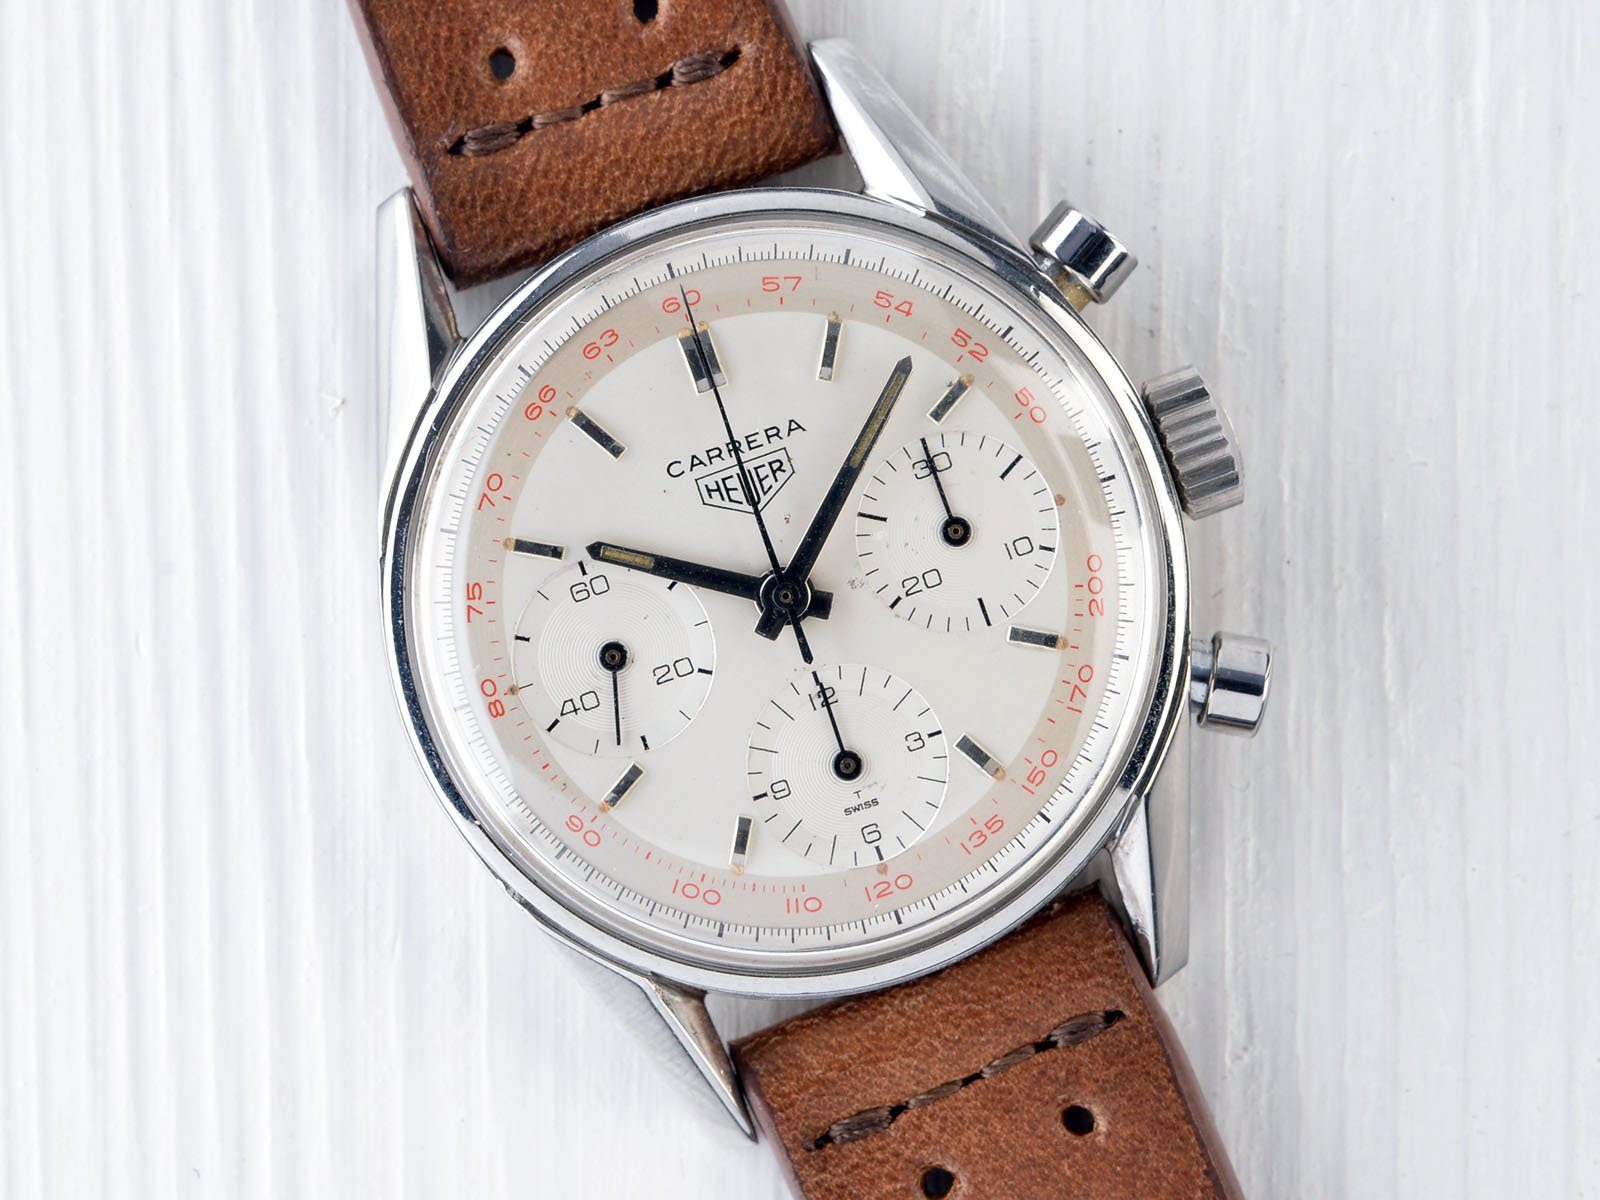 HEUER CARRERA 2447 T FIRST EXECUTION RED TACHY